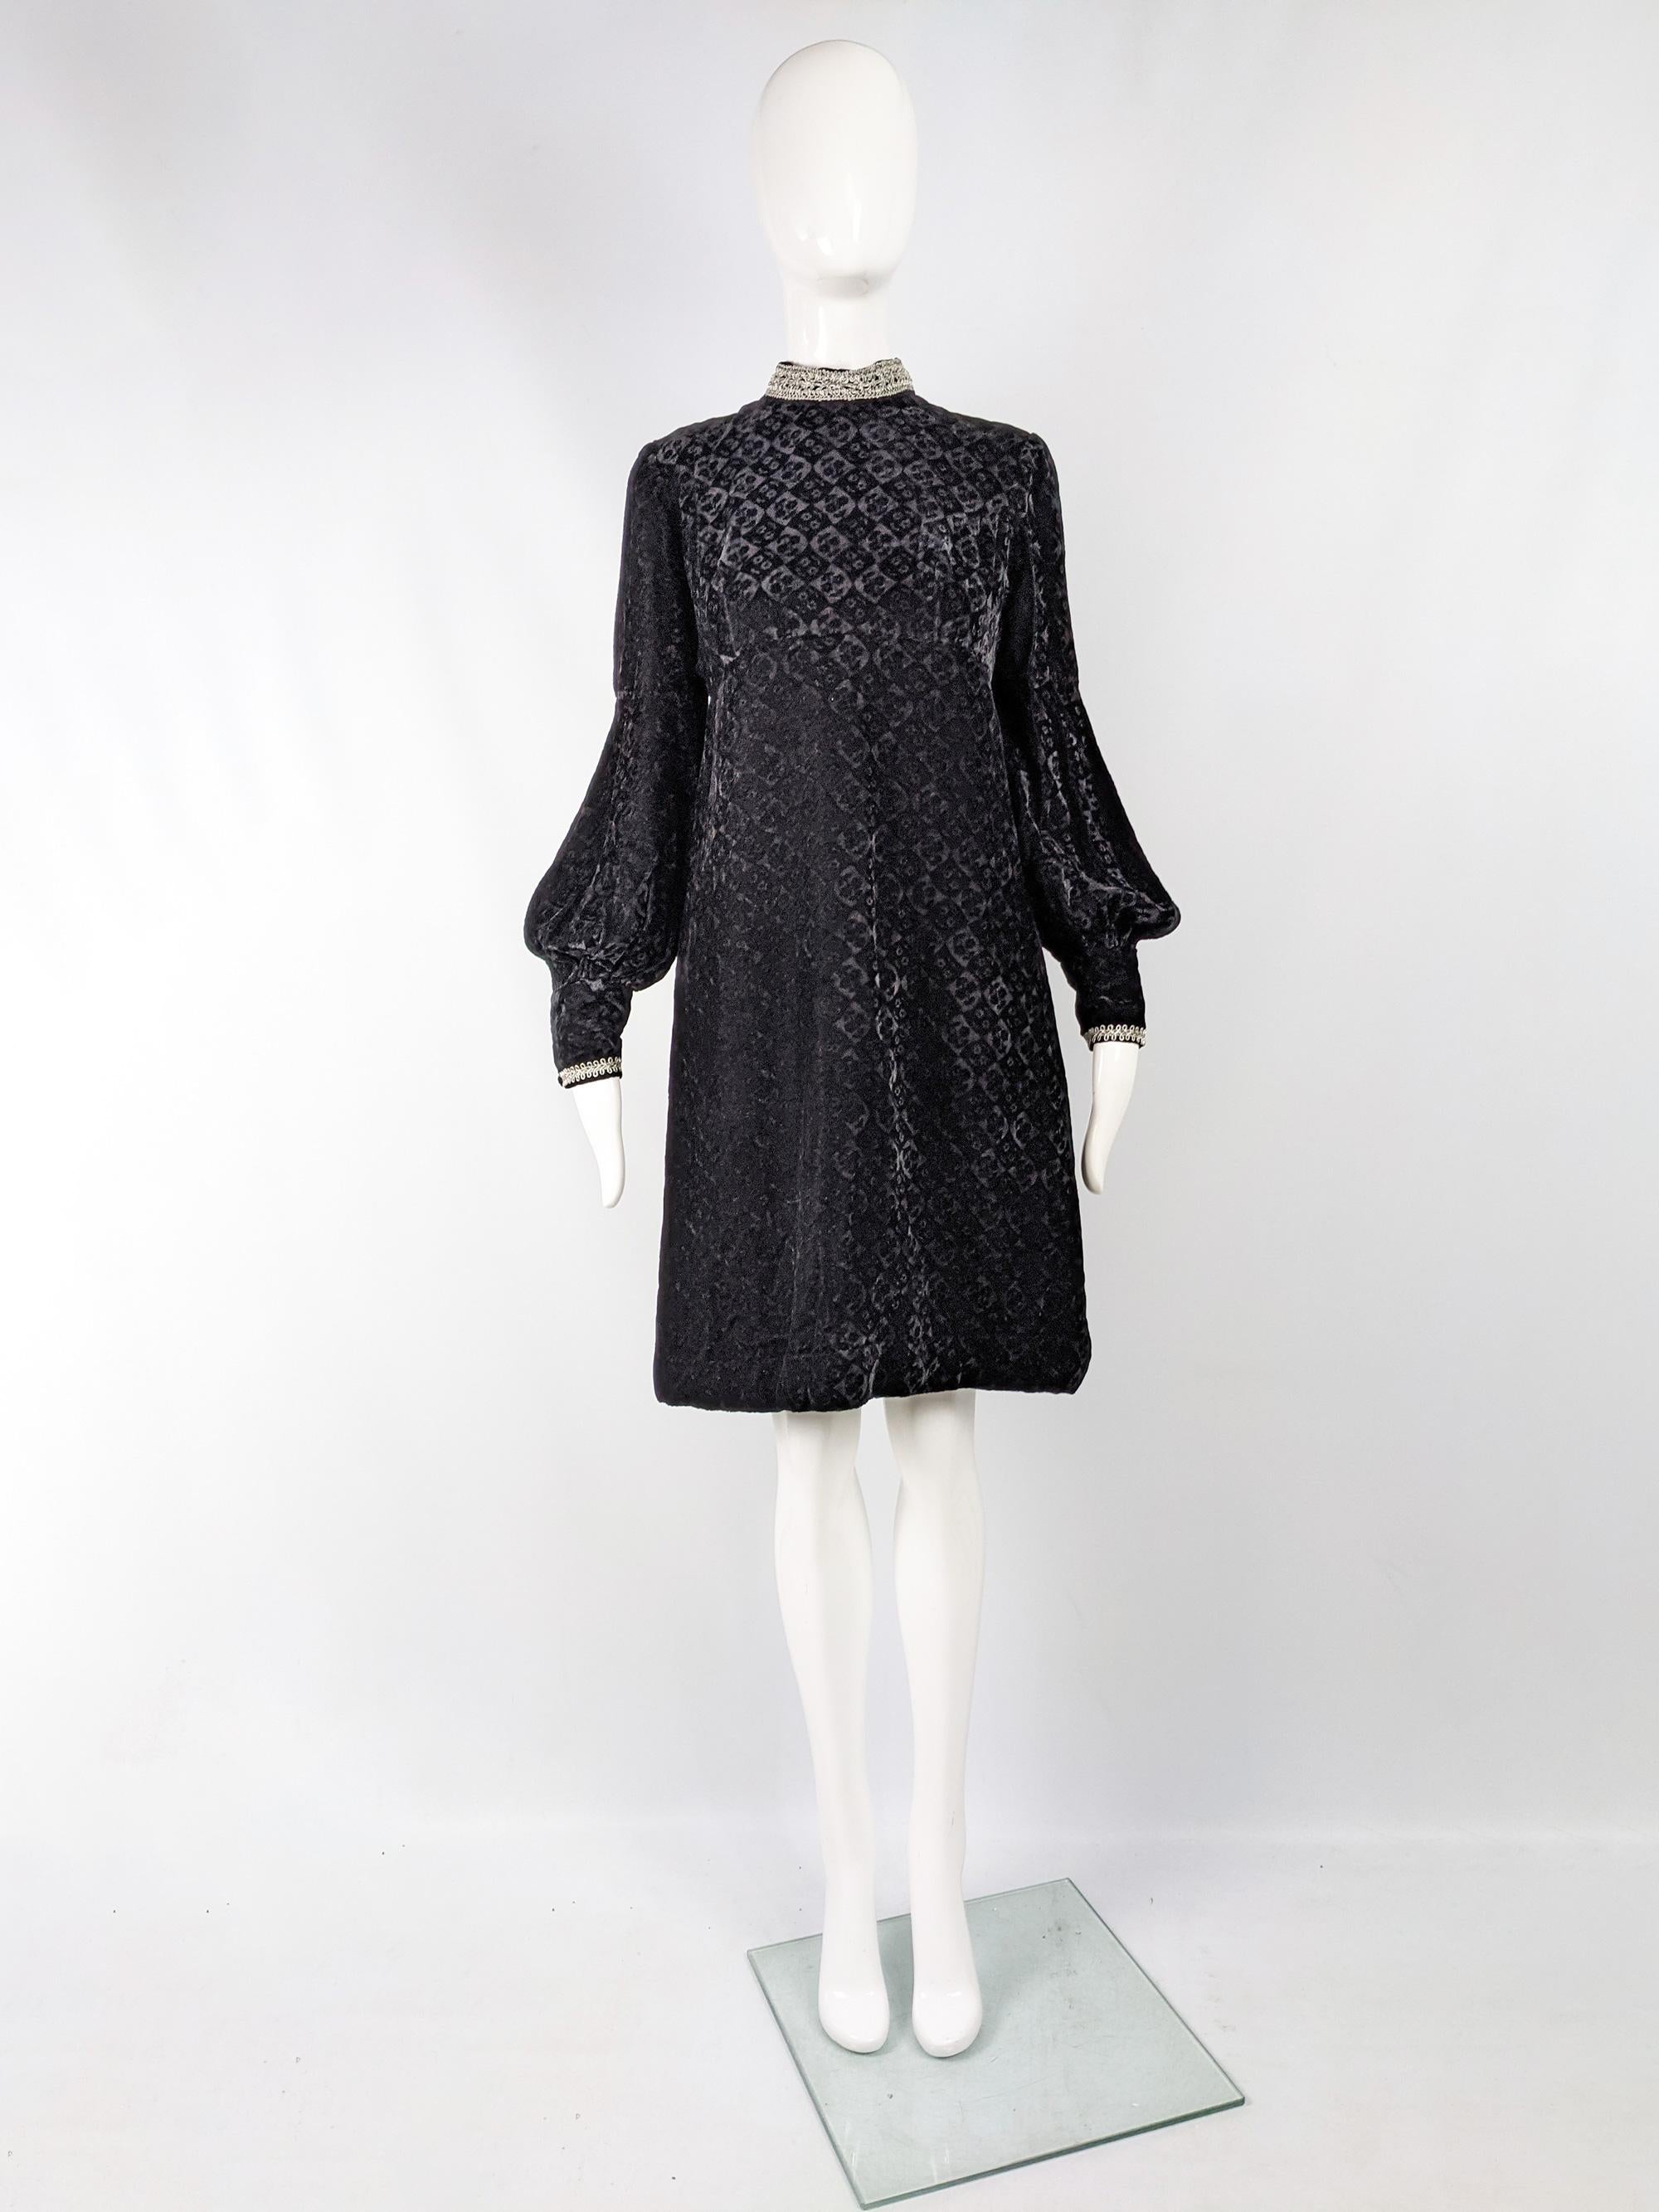 A stunning vintage womens evening / party dress from the 60s by iconic British fashion designer, Jean Varon. In a black floral embossed velvet with balloon shaped lantern sleeves that puff out at the elbow and have a long bishop cuff. It has a high